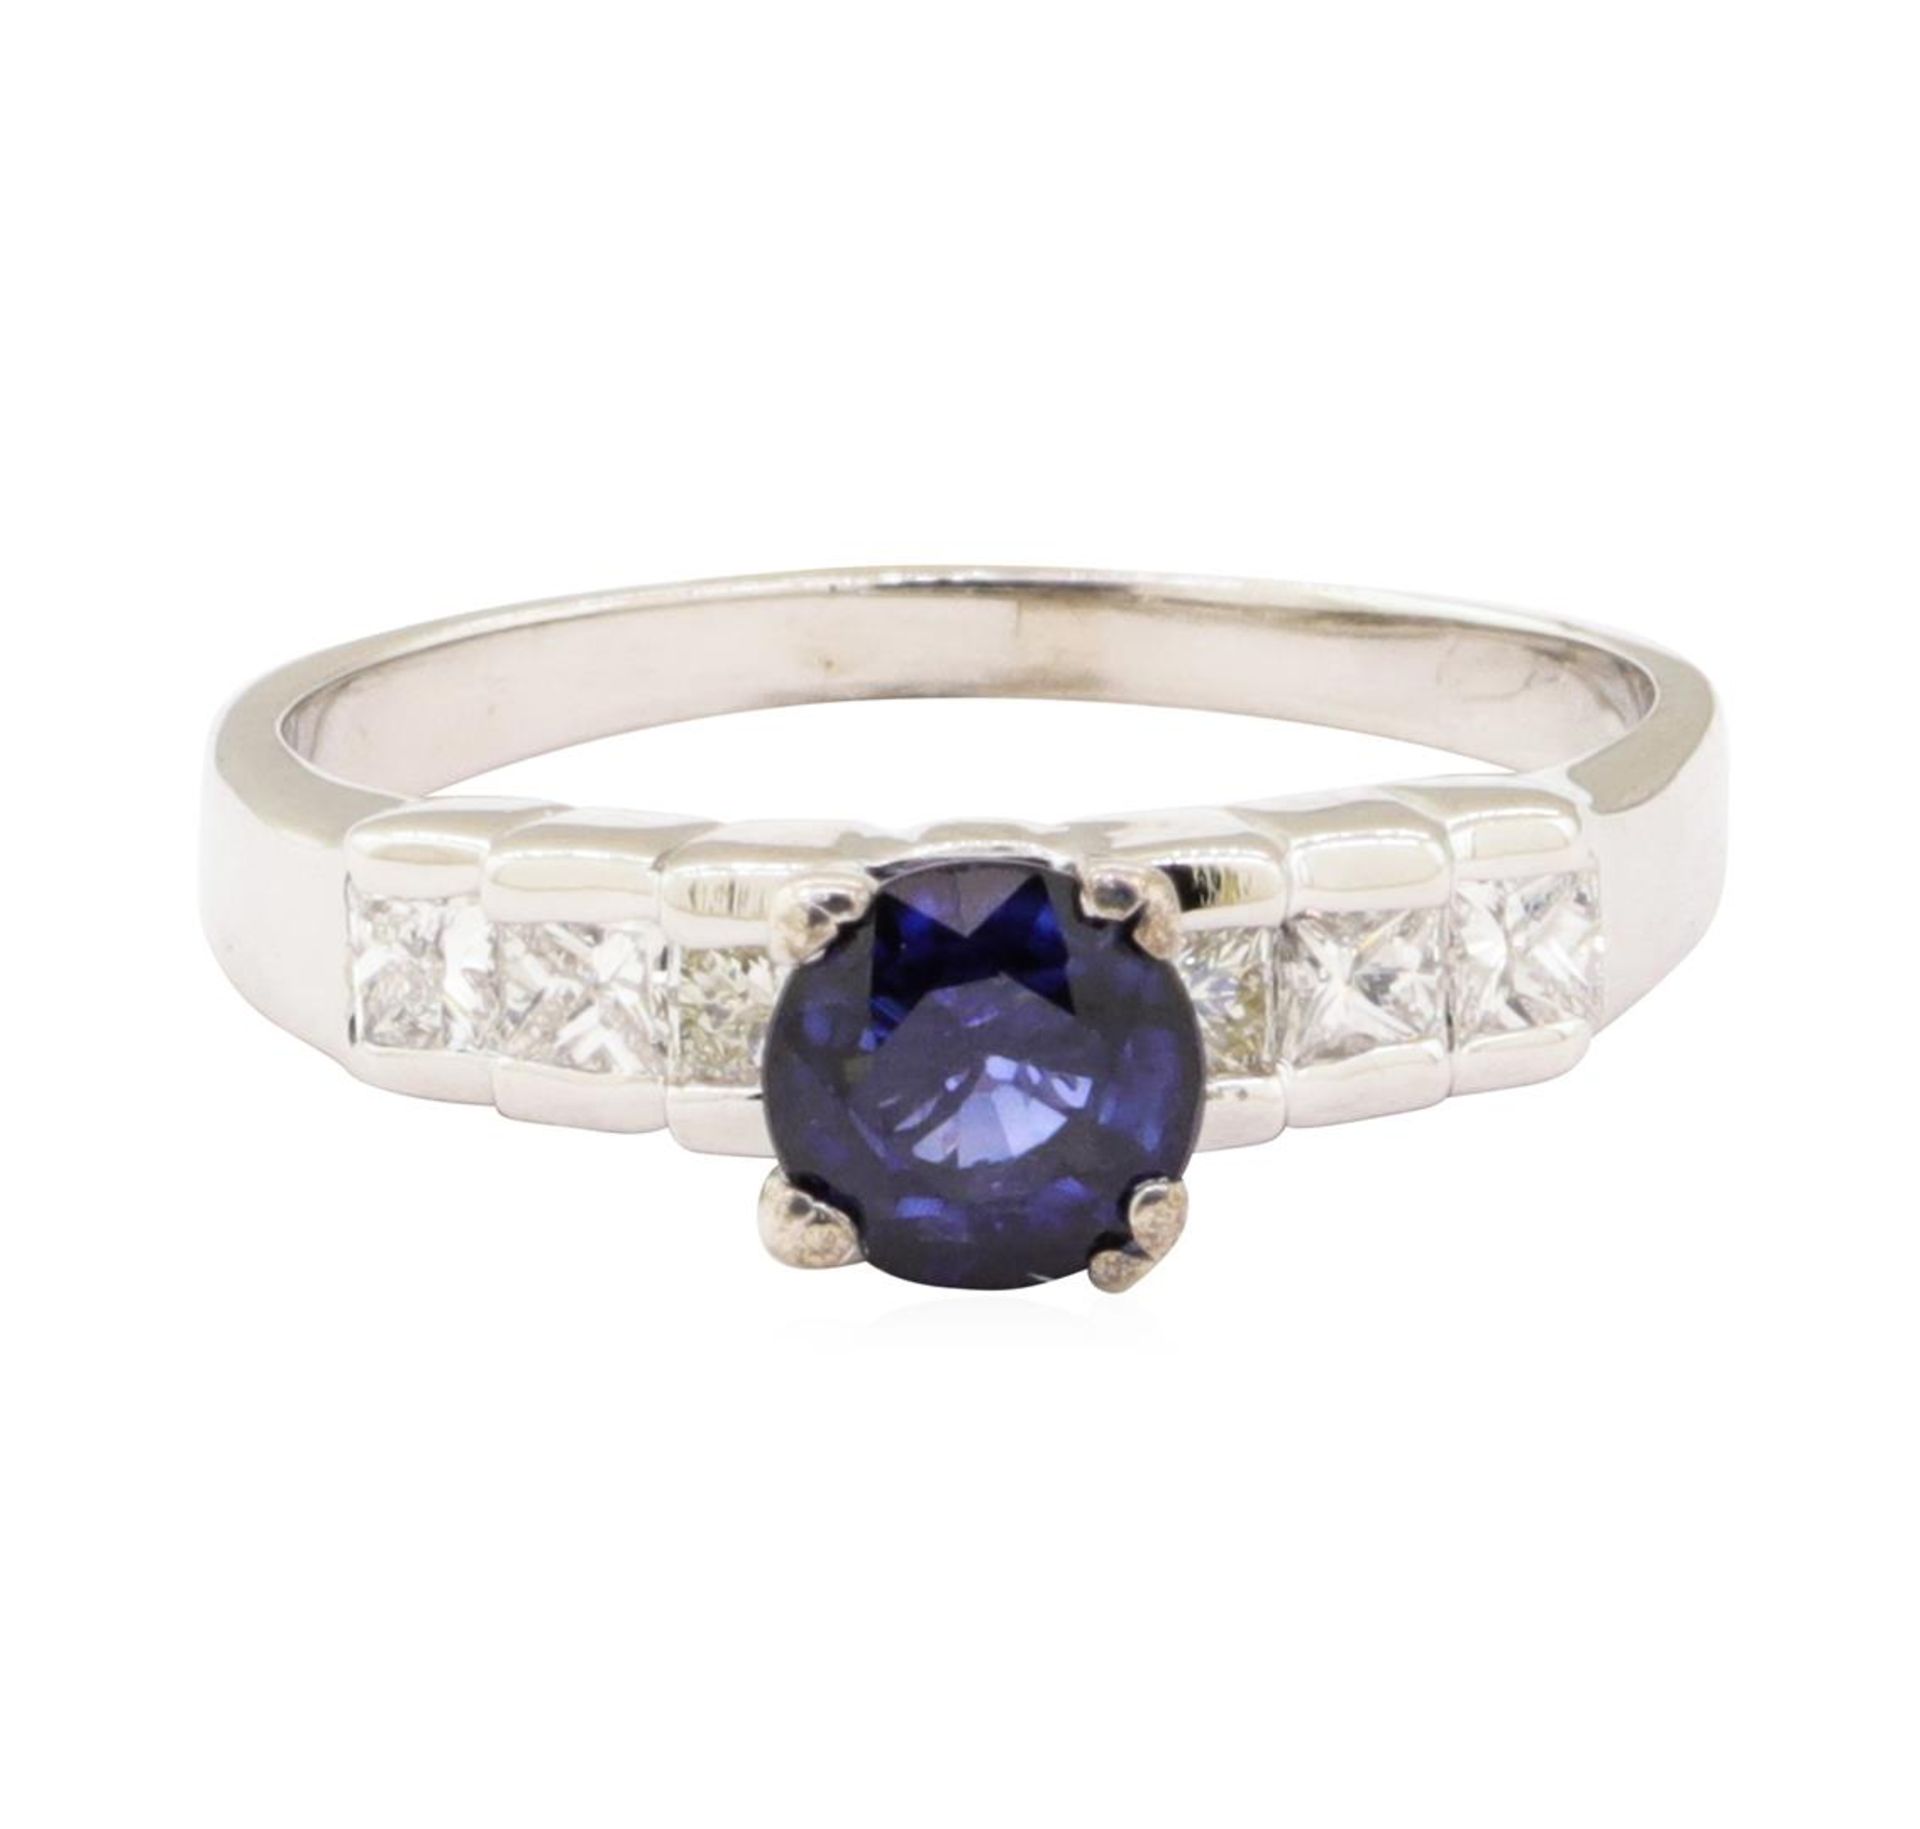 1.34 ctw Blue Sapphire and Diamond Ring - 14KT White Gold - Image 2 of 4